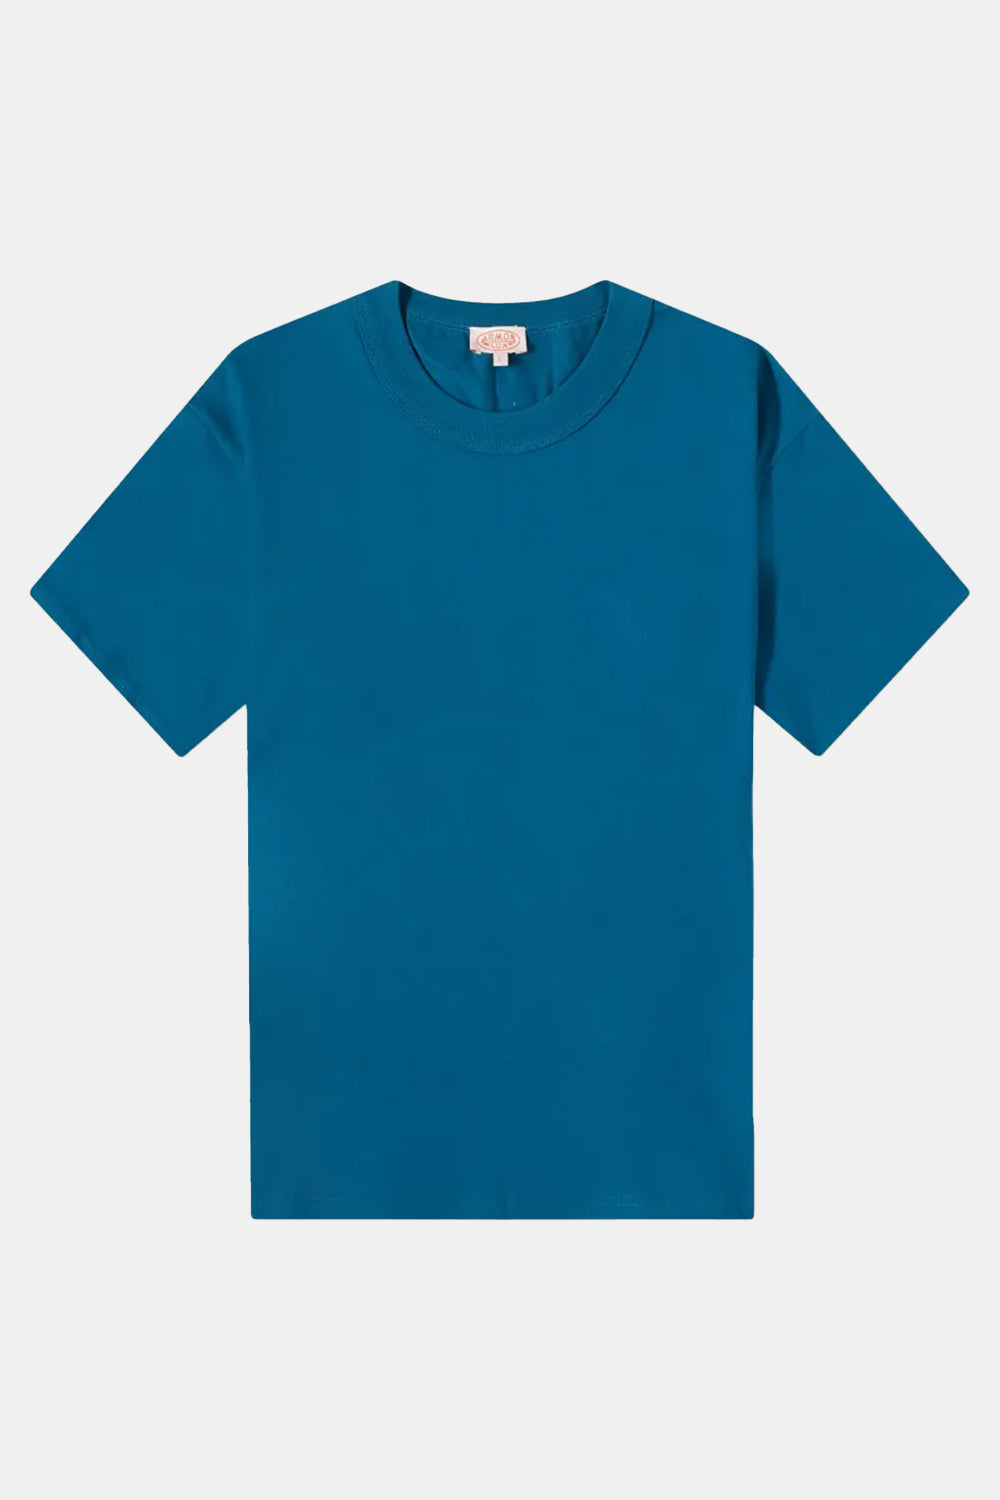 Armor Lux Heritage Organic Callac T-Shirt (Glacial Blue)
